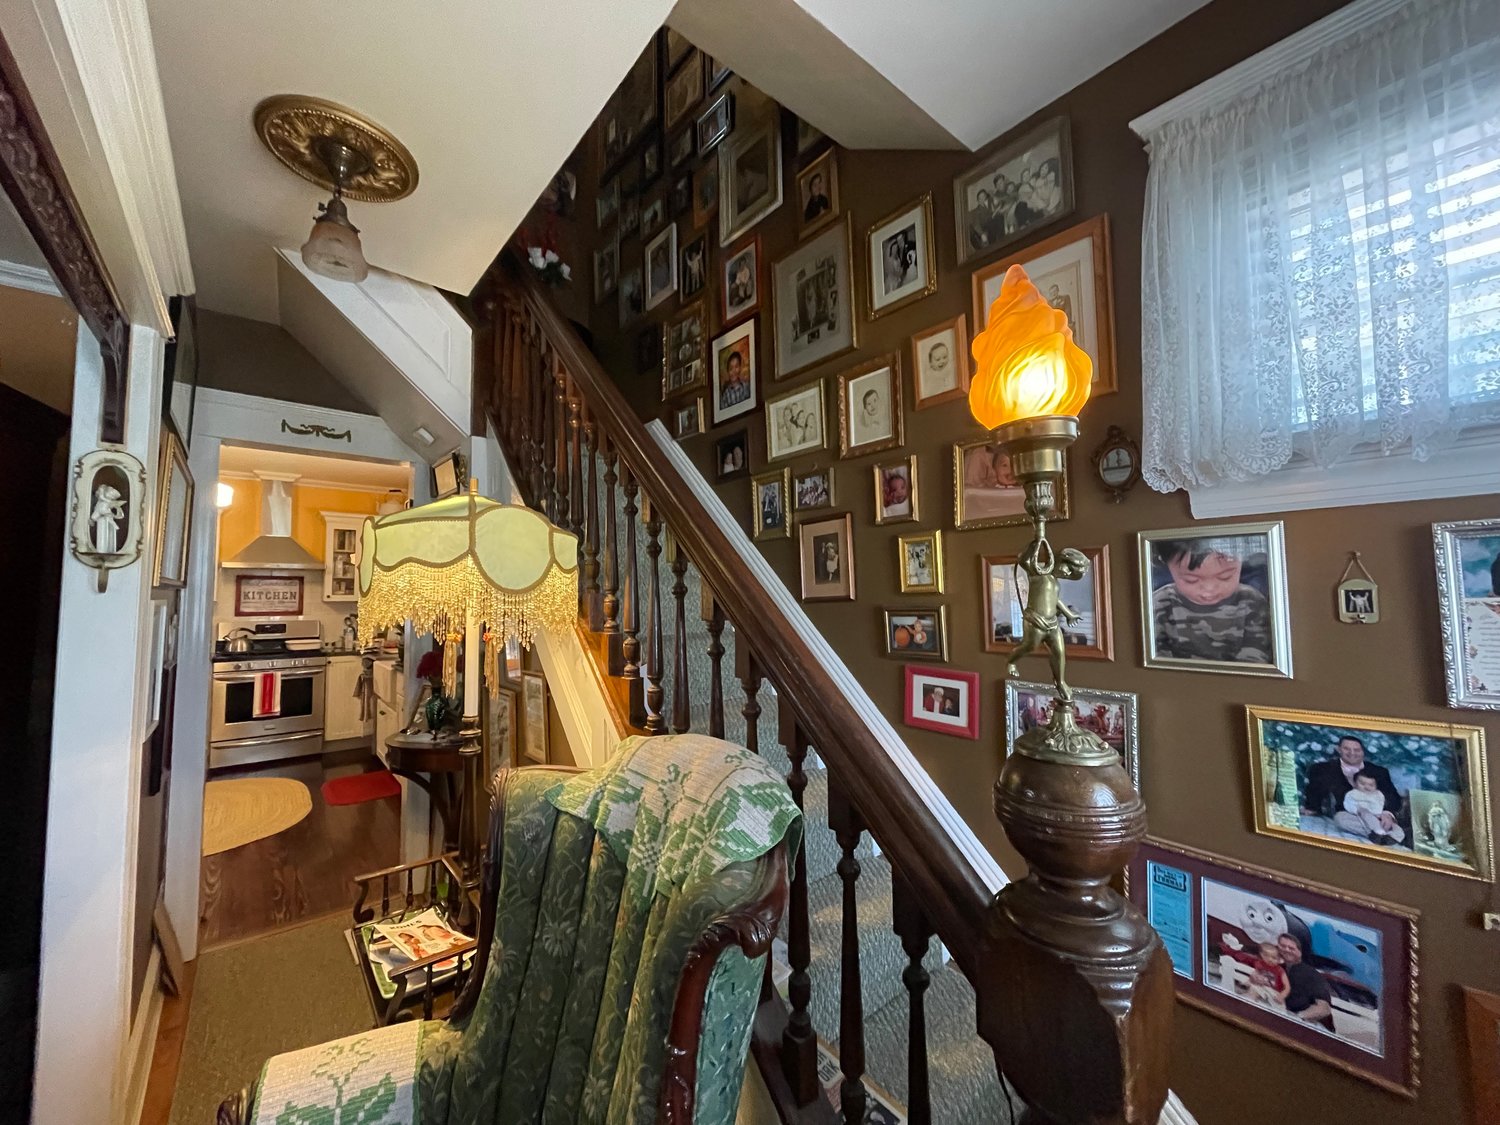 The home, landmarked in 2014, features Victorian-era details, like narrow, steep staircases.